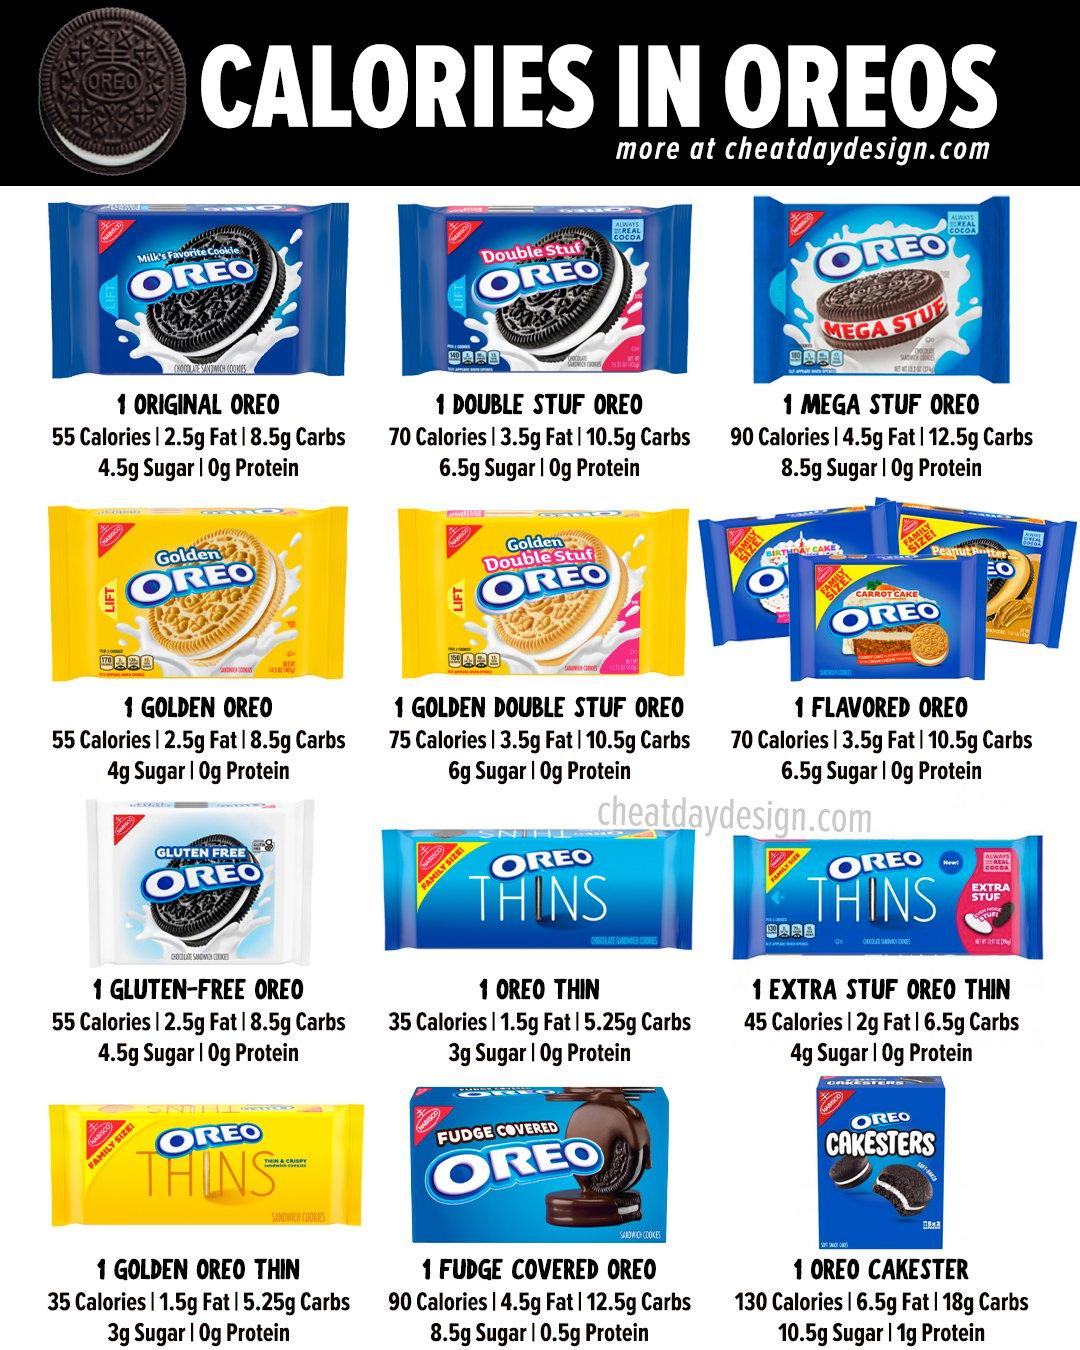 Calories in Every Type of Oreo